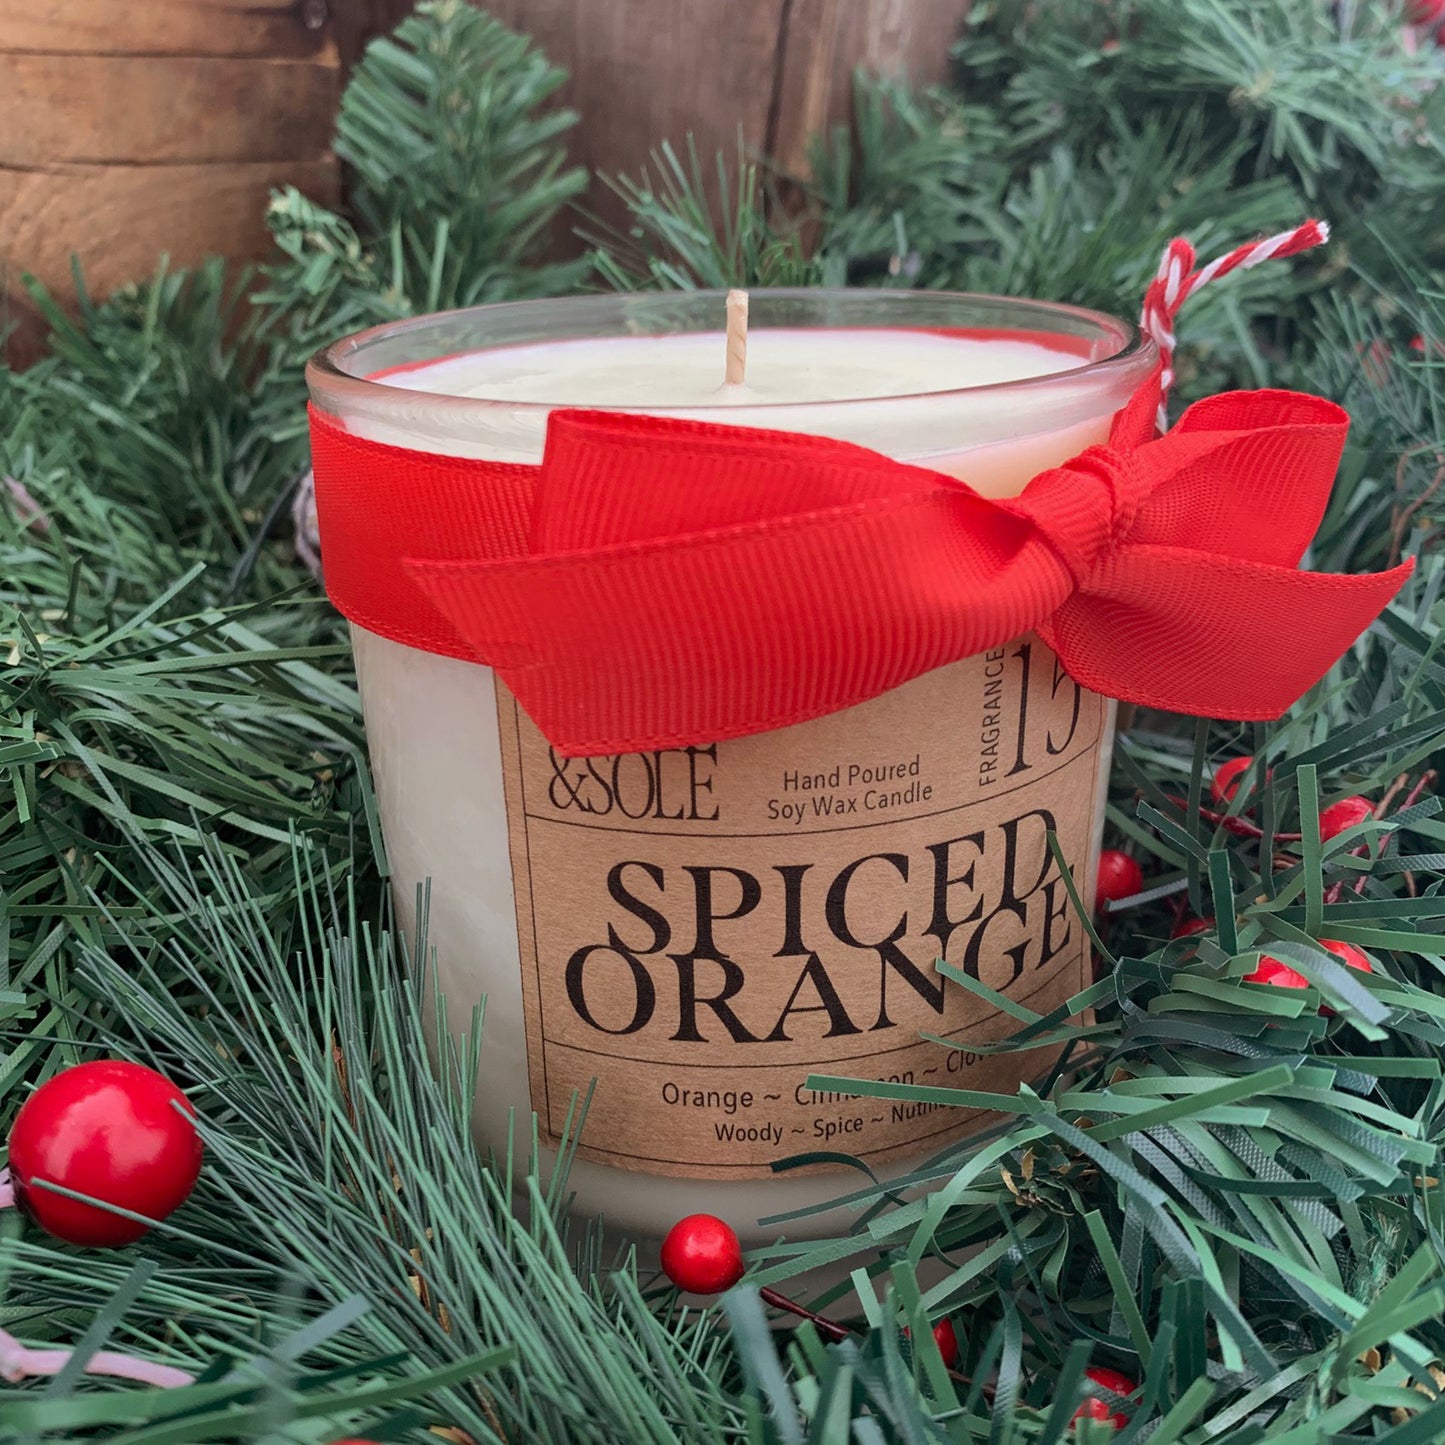 Limited Edition Spiced Orange Large Candle